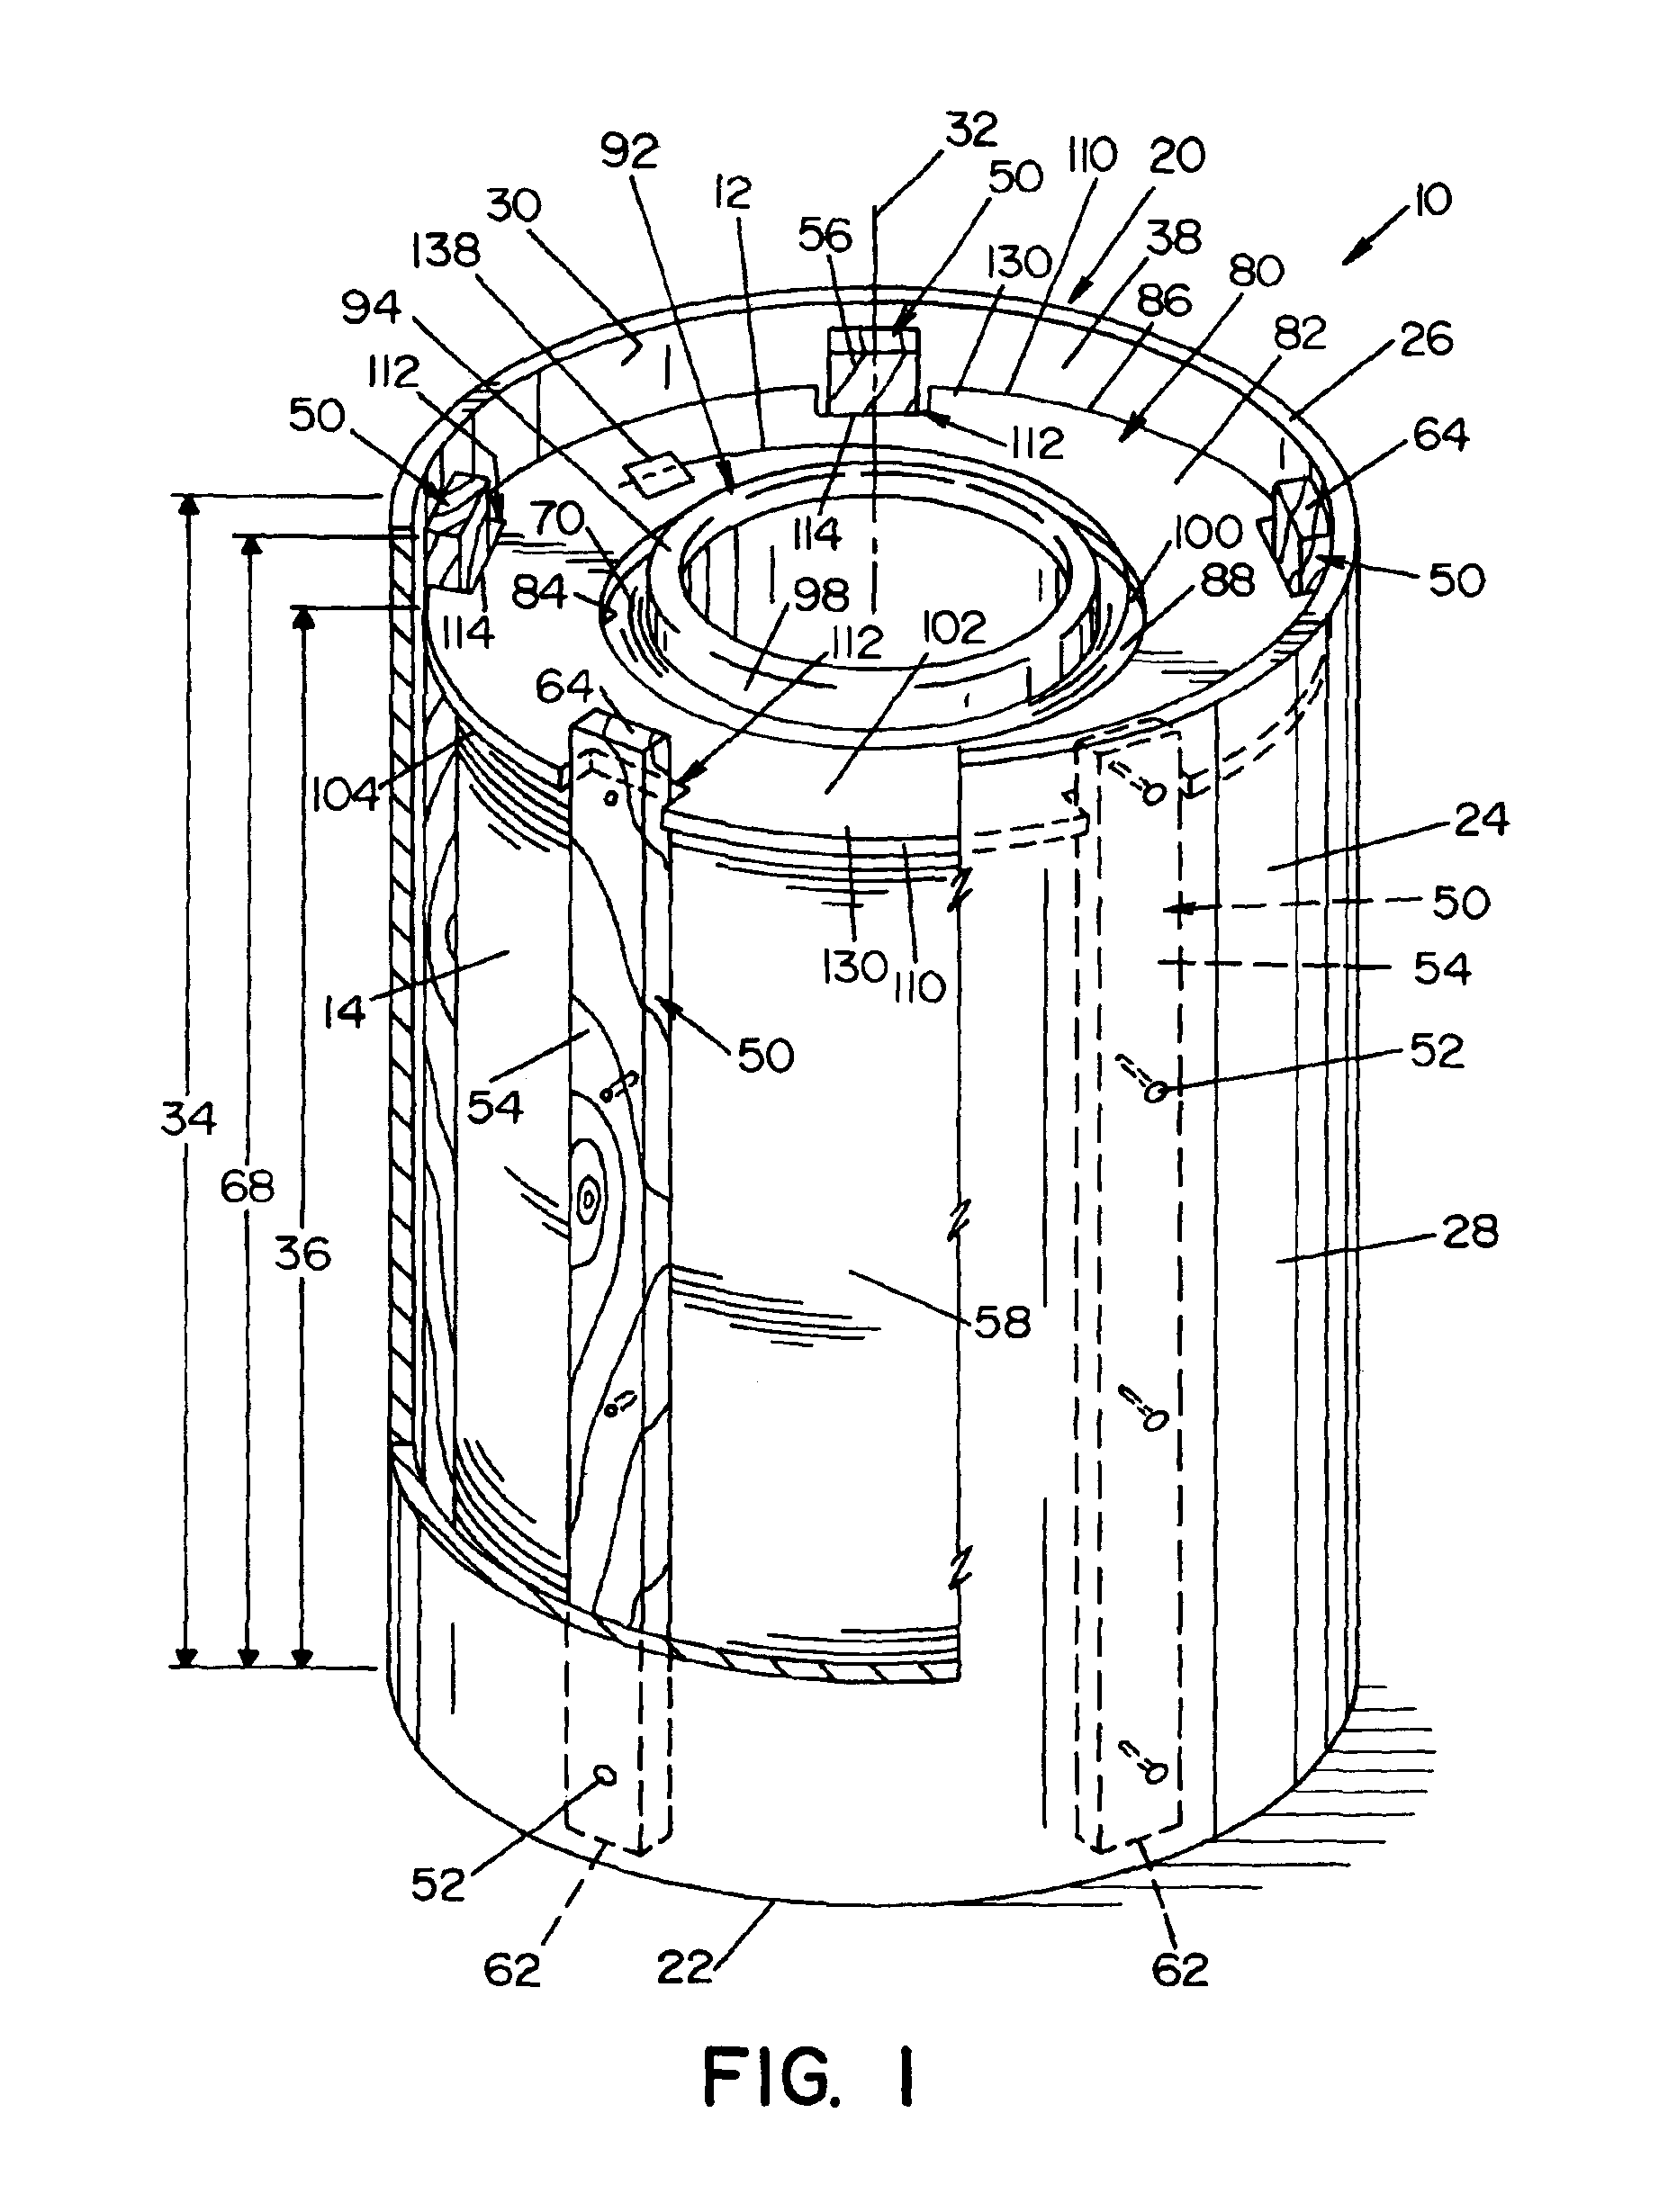 Welding wire container with ribbed walls and a mating retainer ring